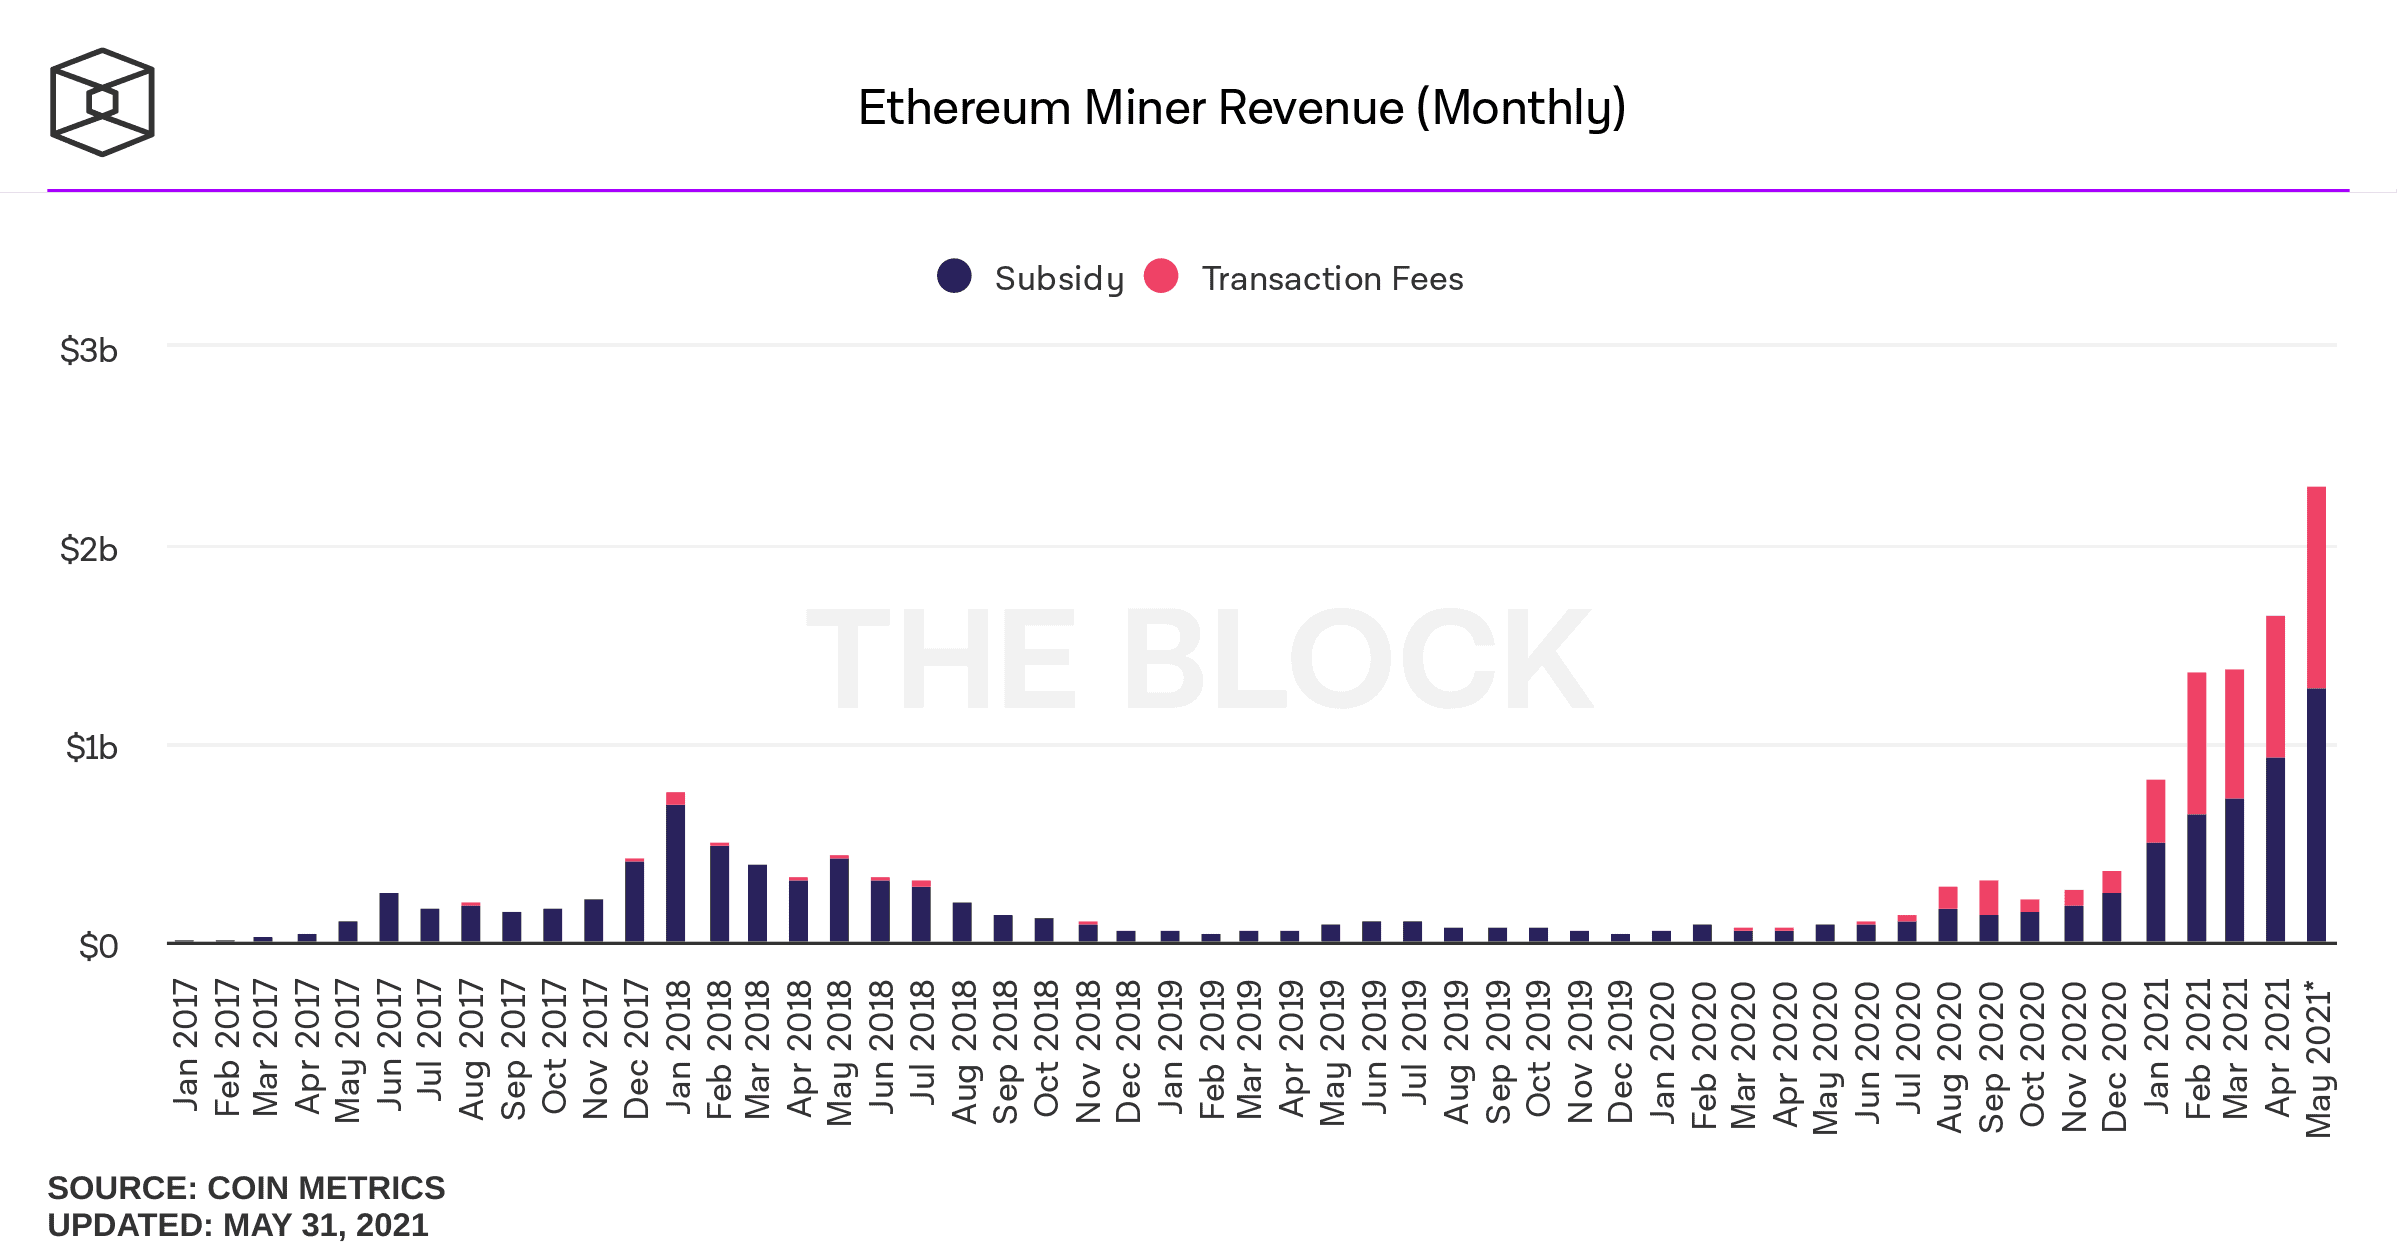 Ethereum total miner revenue per month, all time to May 31, 2021